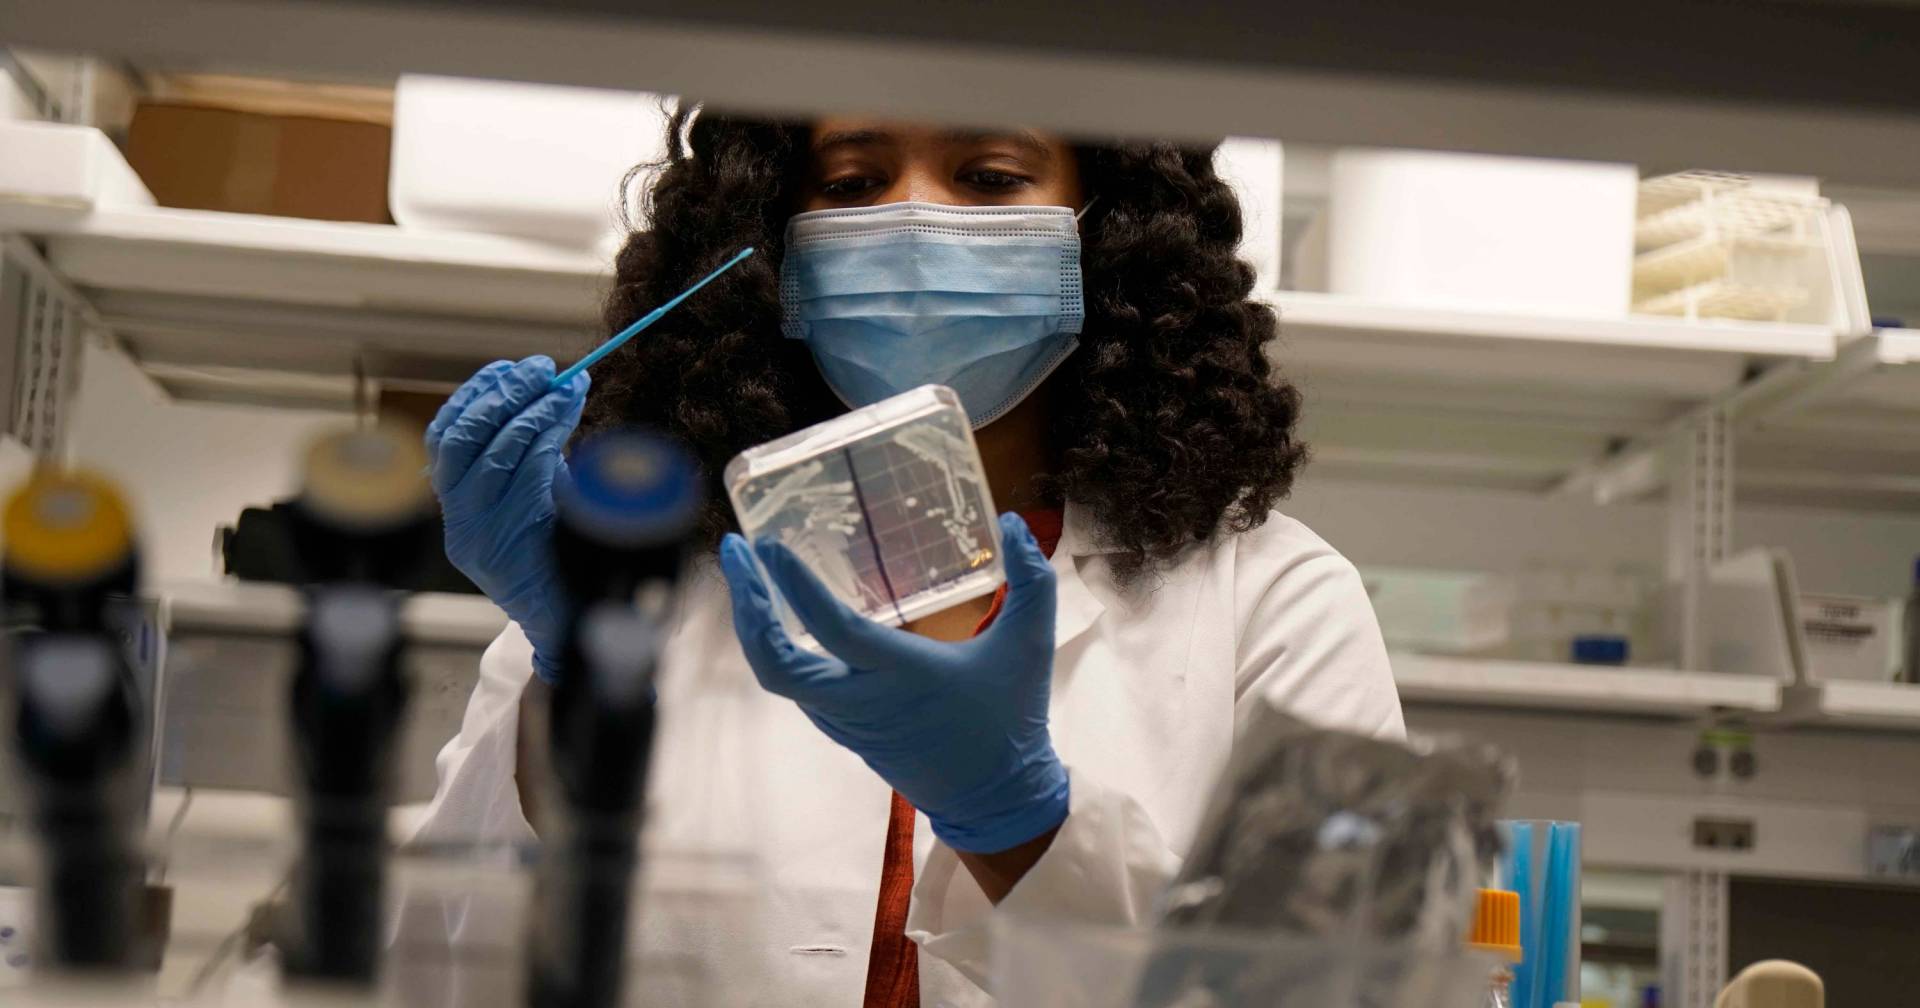 A graduate student works with a petri dish in a lab while wearing a mask and gloves